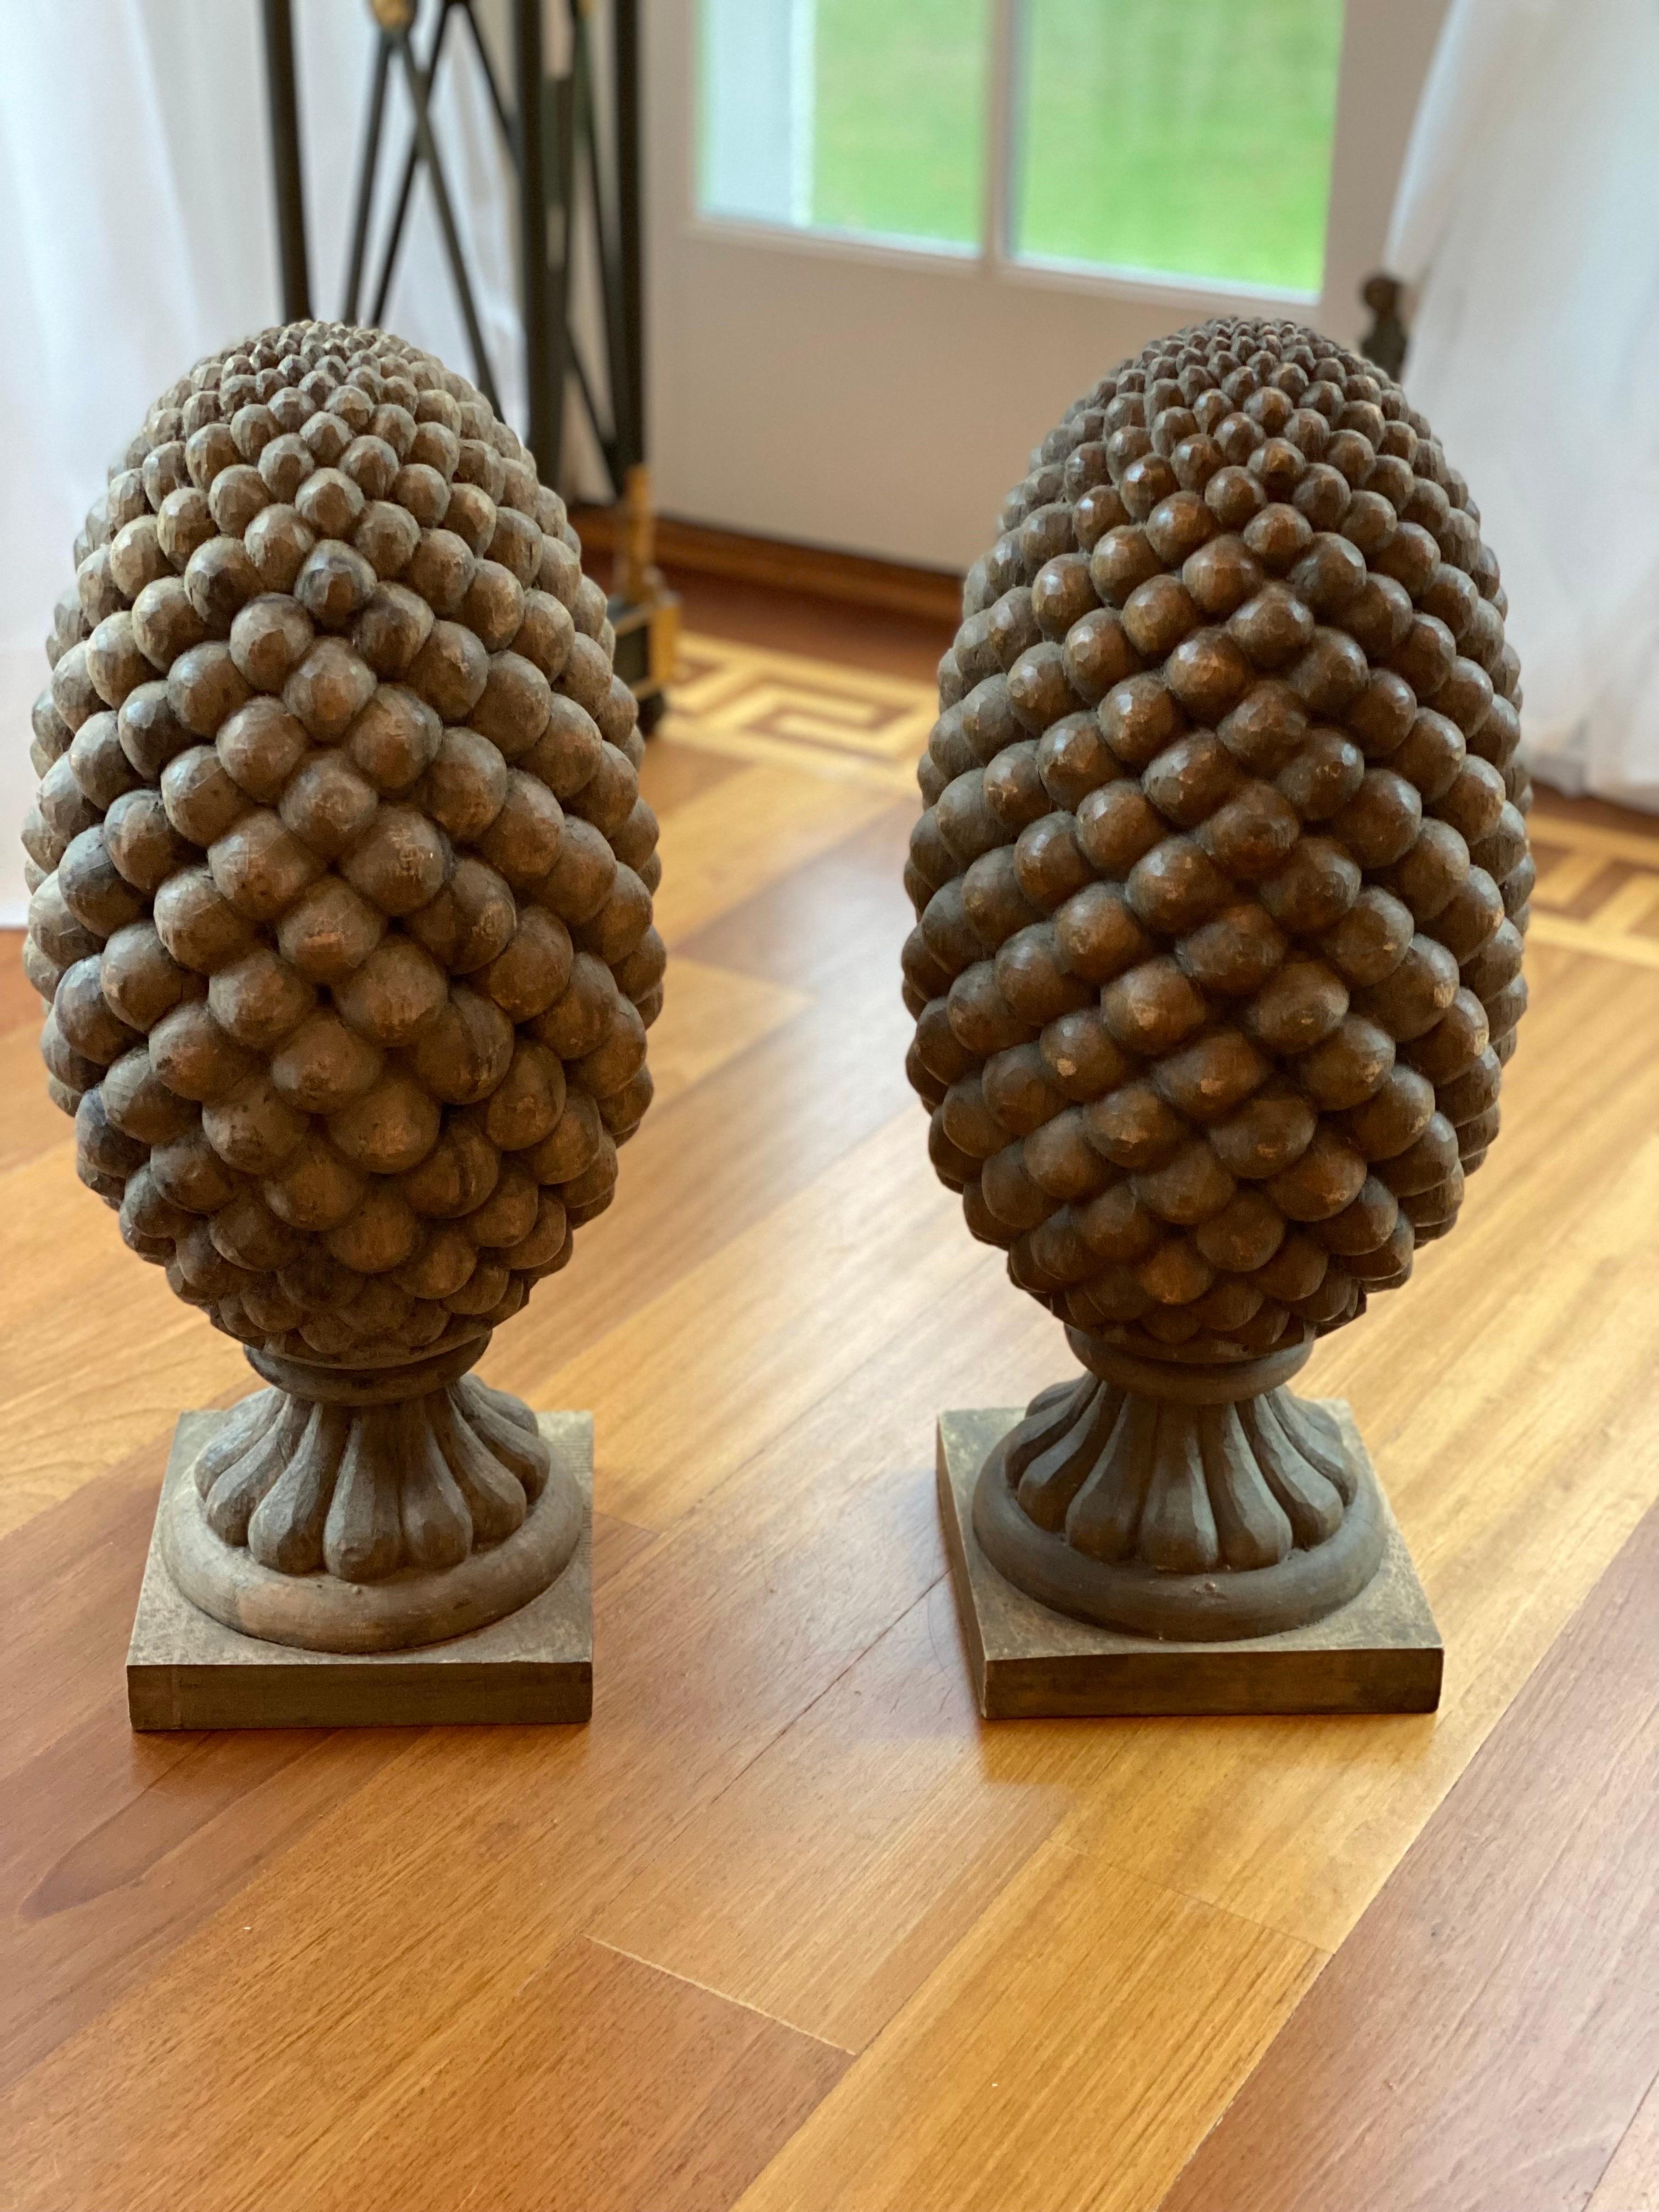 Pair of large solid hand-carved wood pinecone finials, 20th century.
A handsomepair of solid wood hand-carved finials in the shape of a pinecones.
Measures: 10” wide x 10” deep x 23” high.
Some slight separation. Good overall